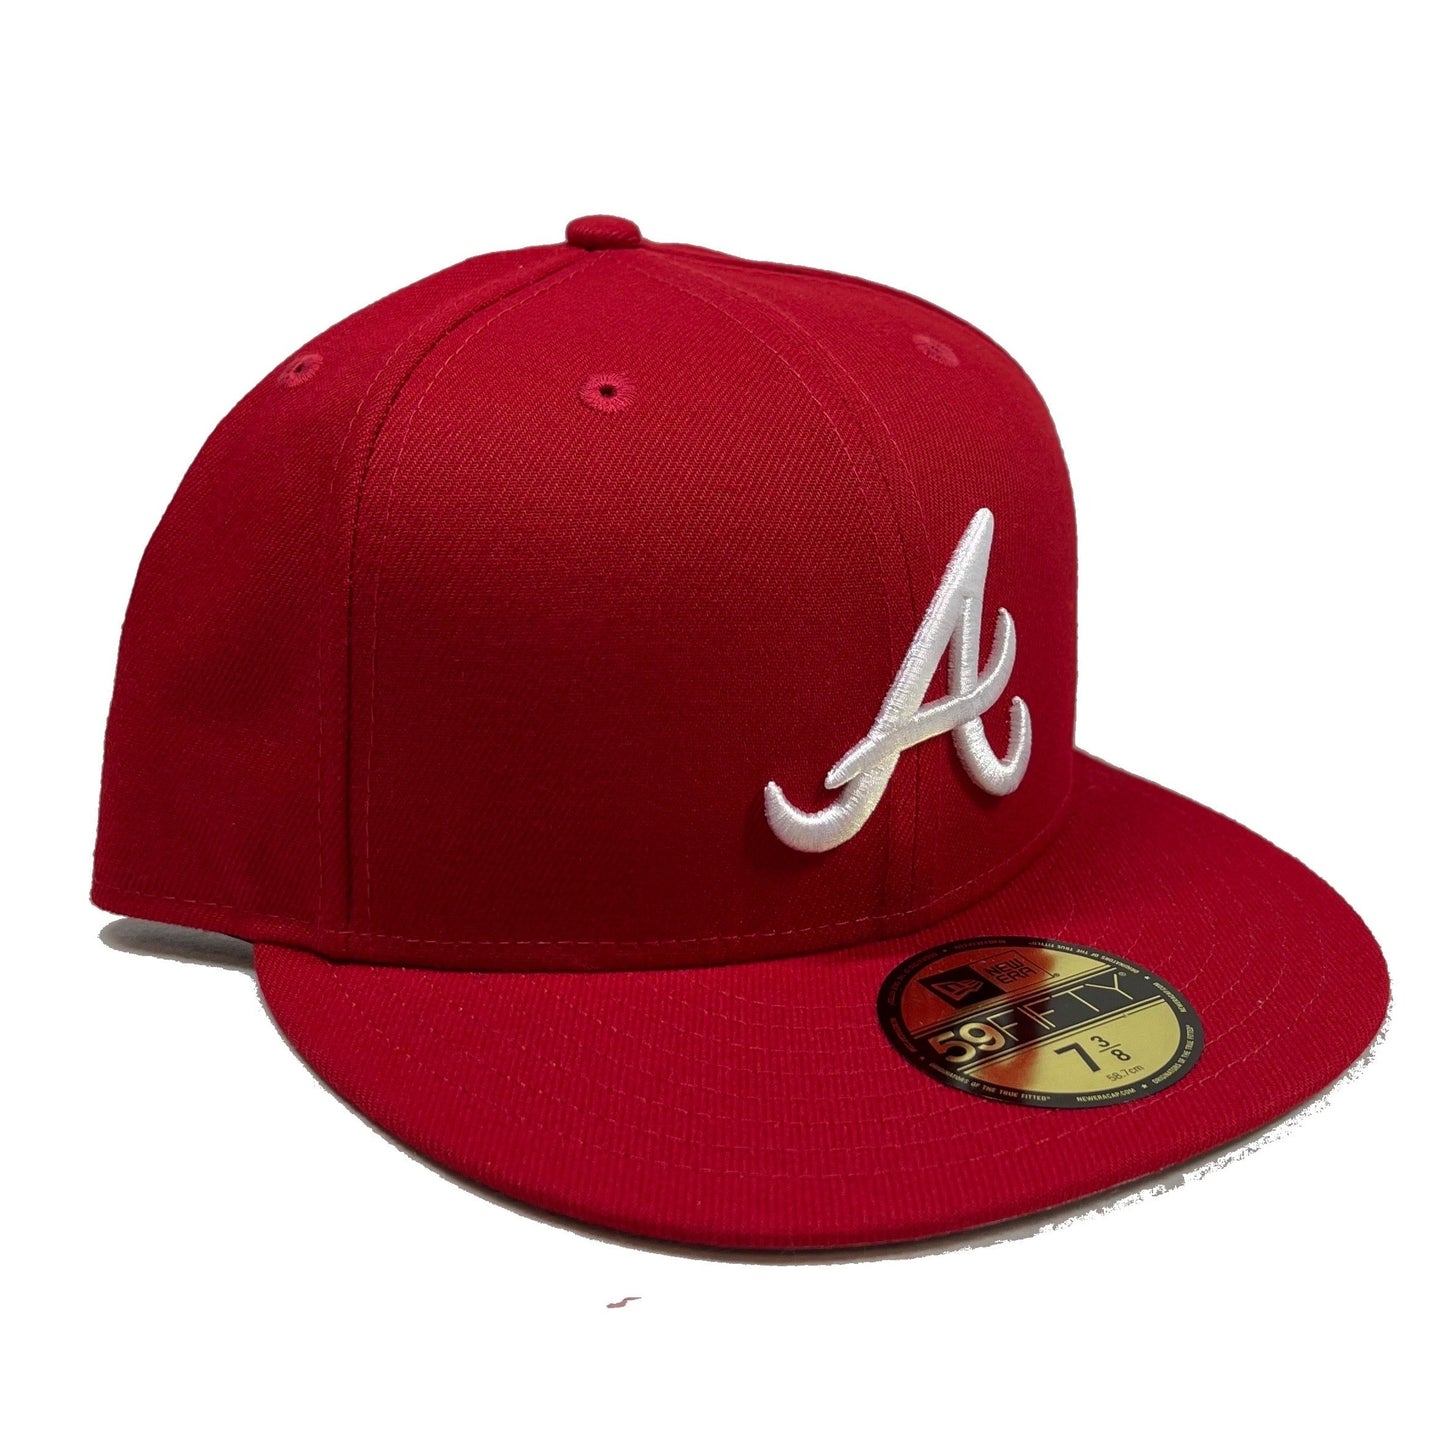 Atlanta Braves (Red) Fitted